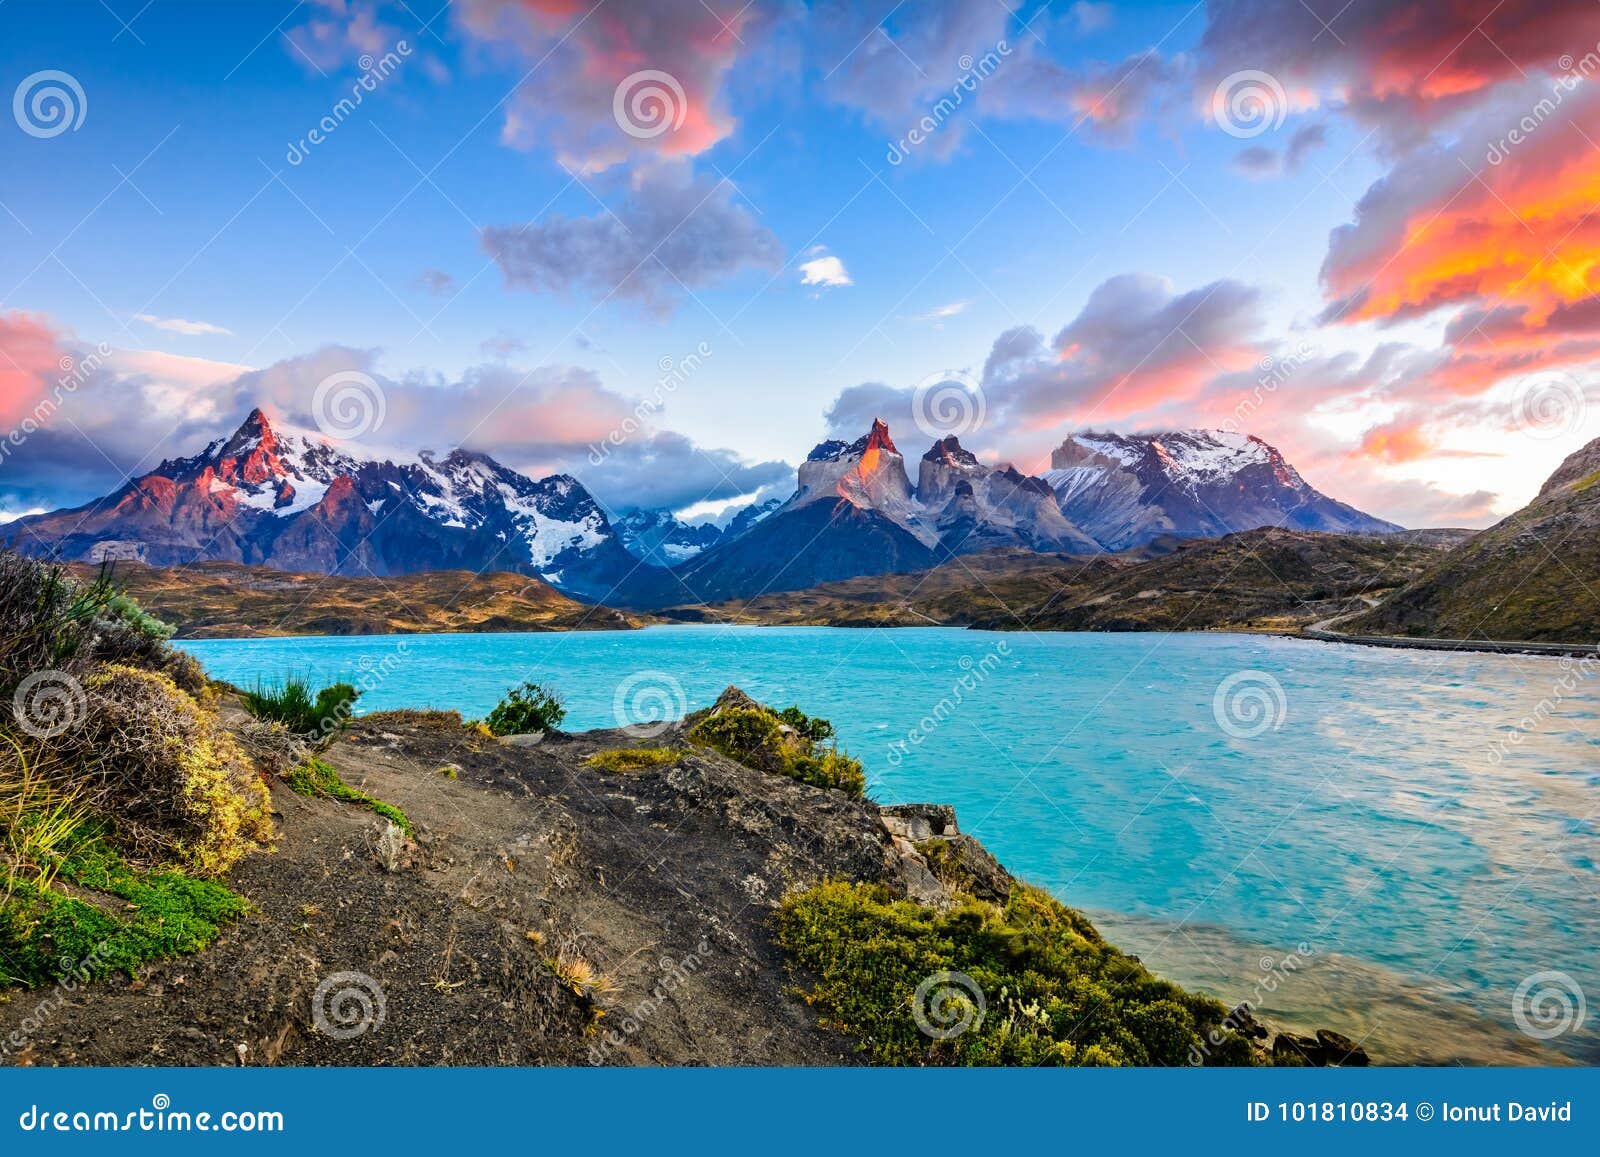 torres del paine over the pehoe lake, patagonia, chile - southern patagonian ice field, magellanes region